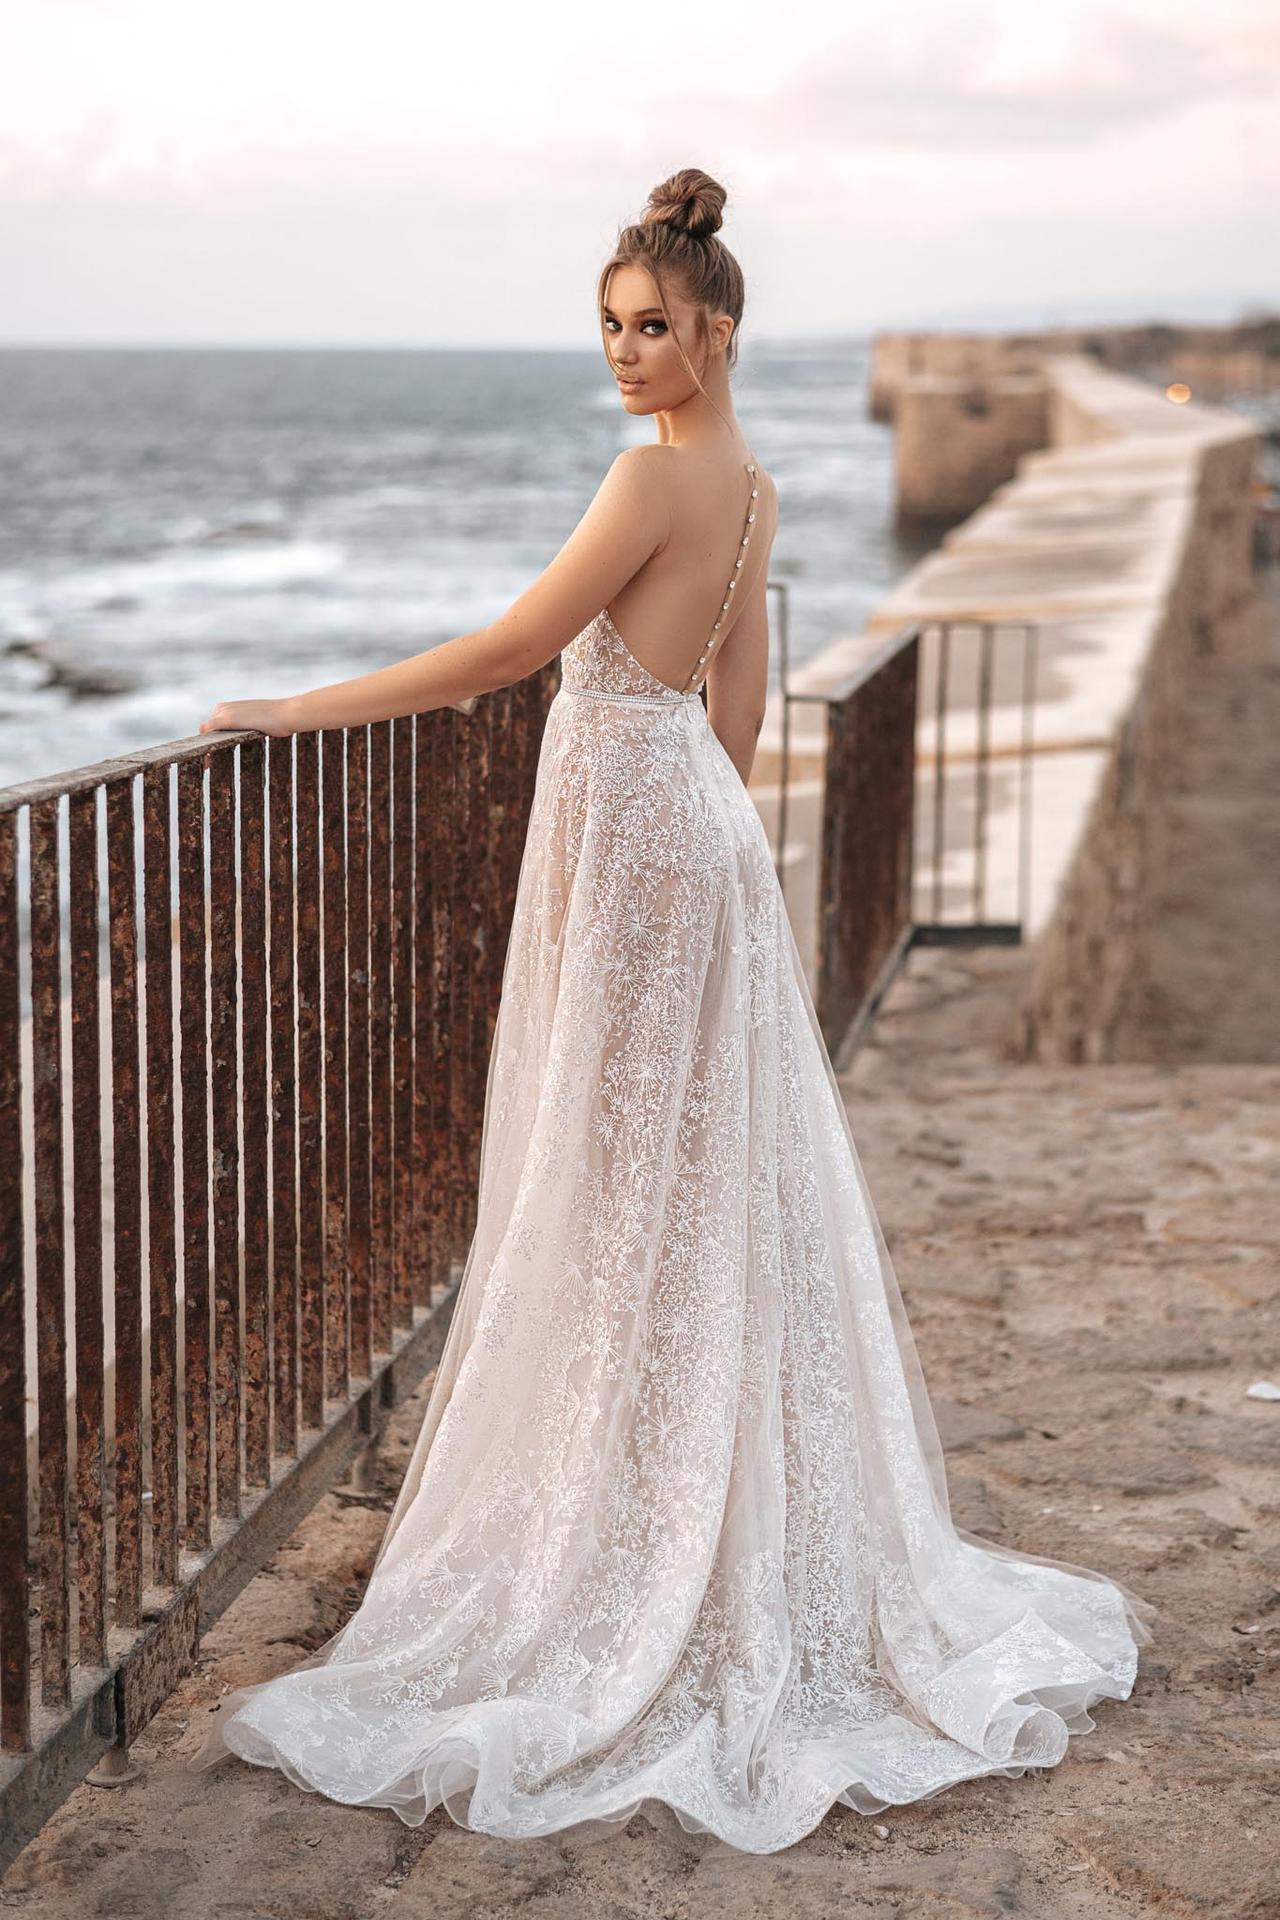 Open Back Wedding Dress With Stars, Modern Bridal Gown With